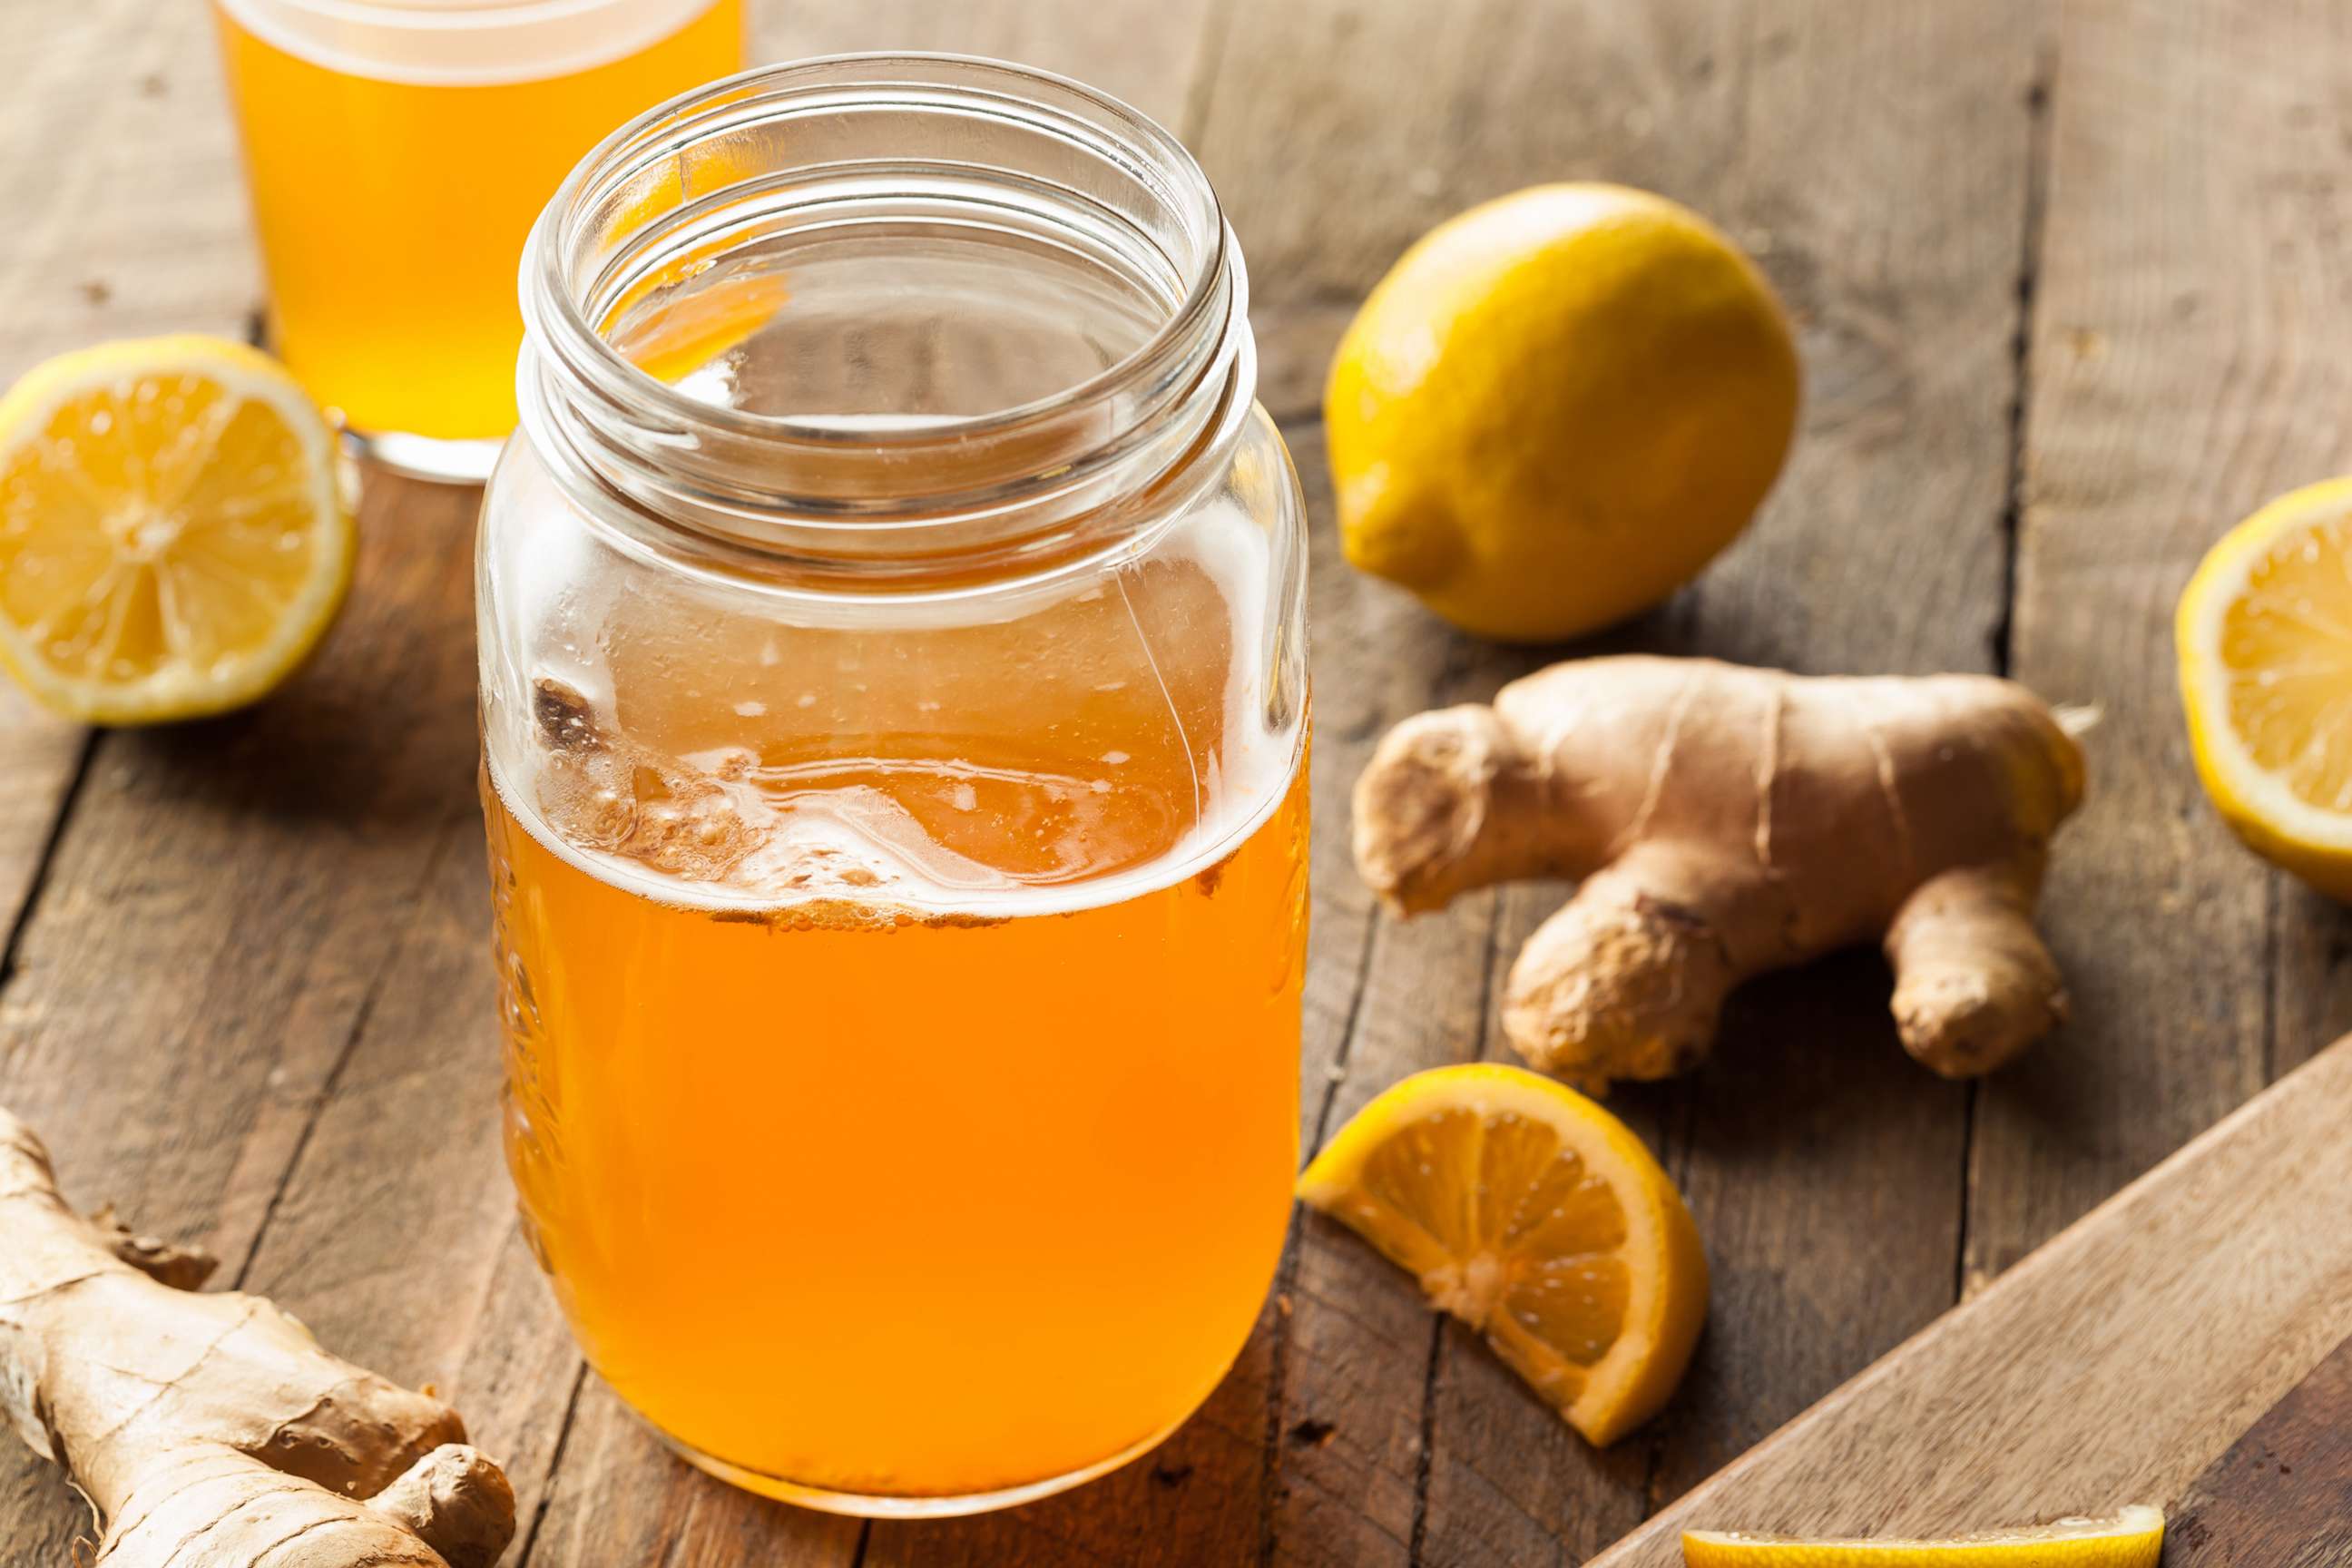 PHOTO: Homemade fermented raw kombucha tea is pictured in an undated stock photo.